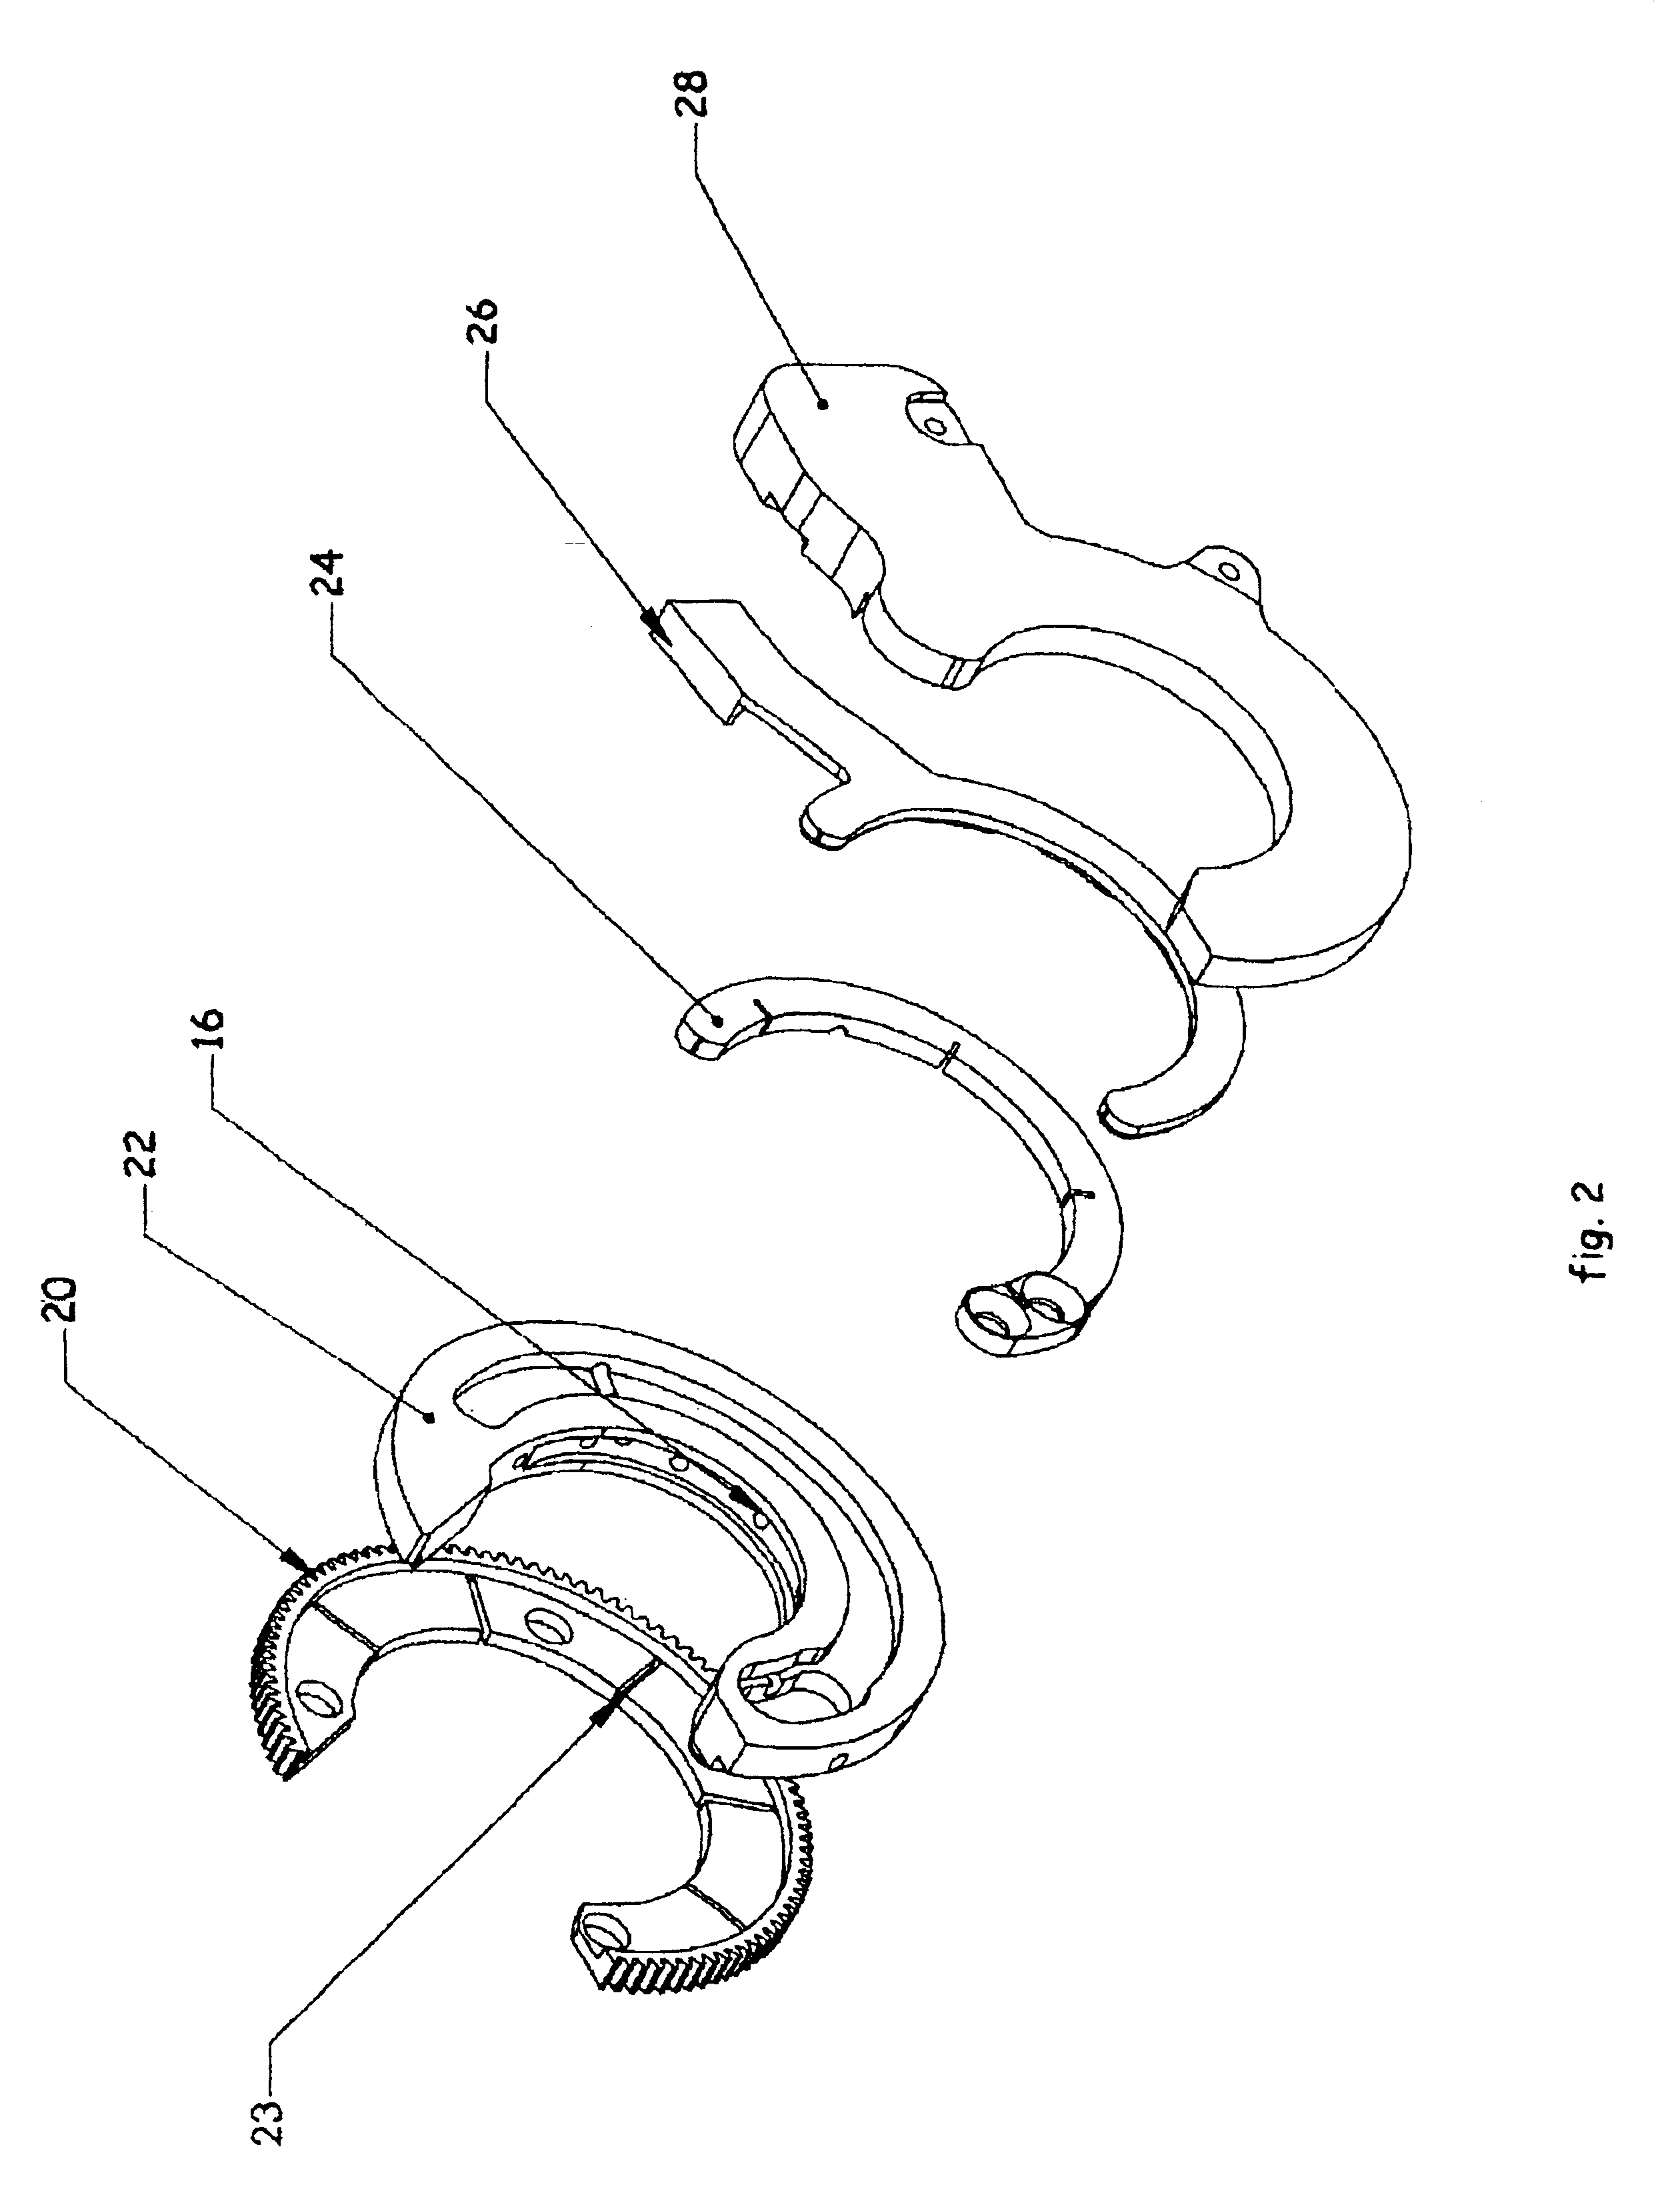 Ceramic weld insulator and metal weld gear combination for an improved micro weld head component of an orbital tube welding apparatus